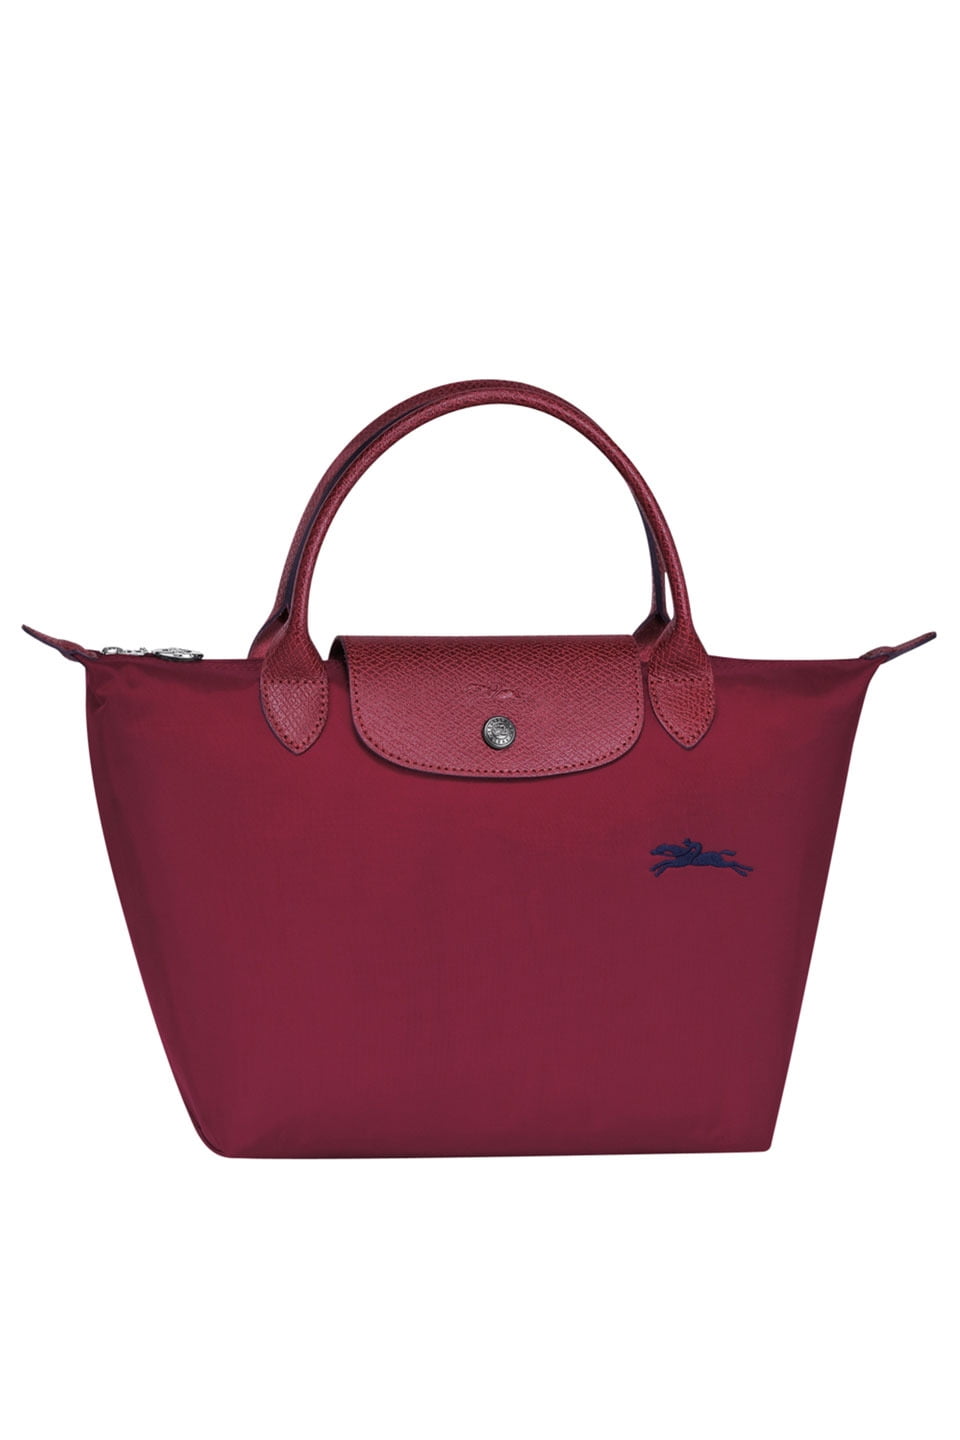 Longchamp Le Pliage Bag TopHandle S In Red Walmart Canada